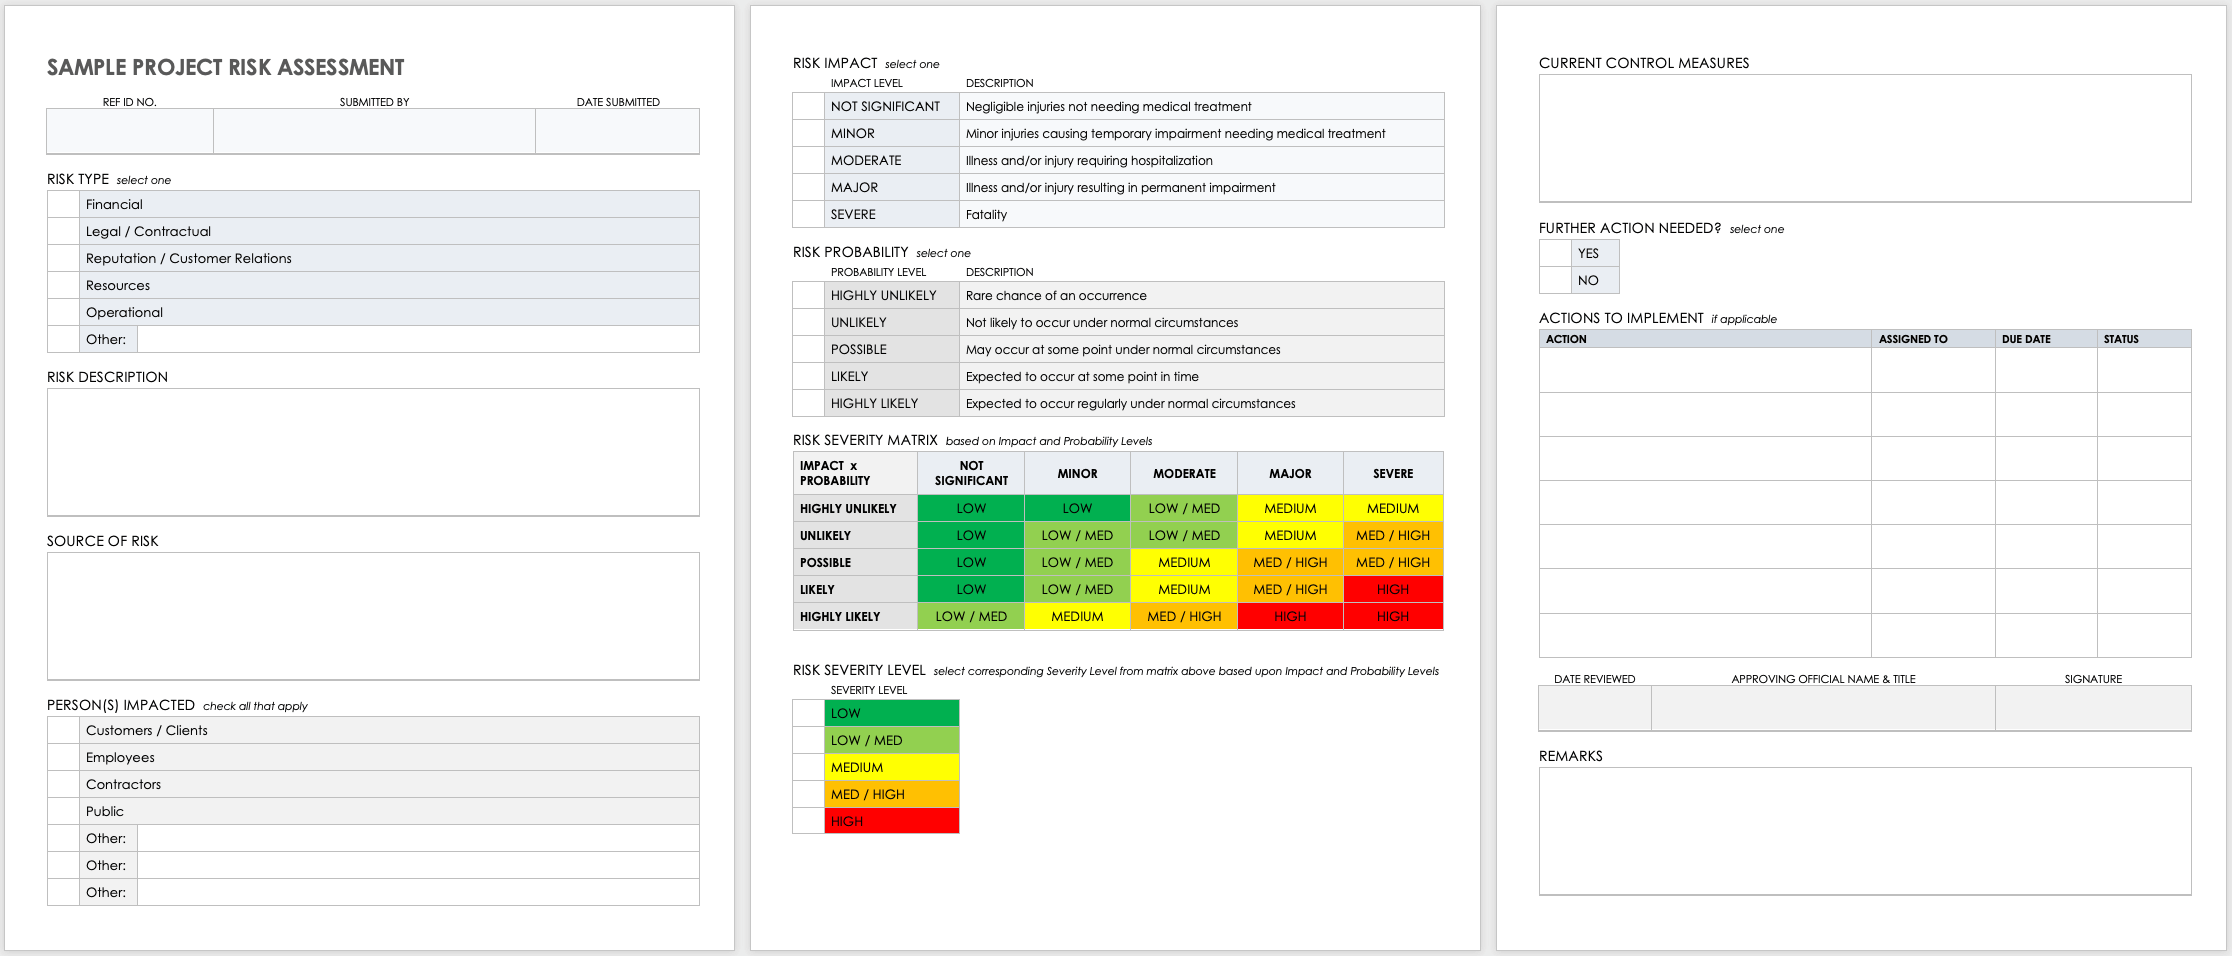 Sample Project Risk Assessment Template